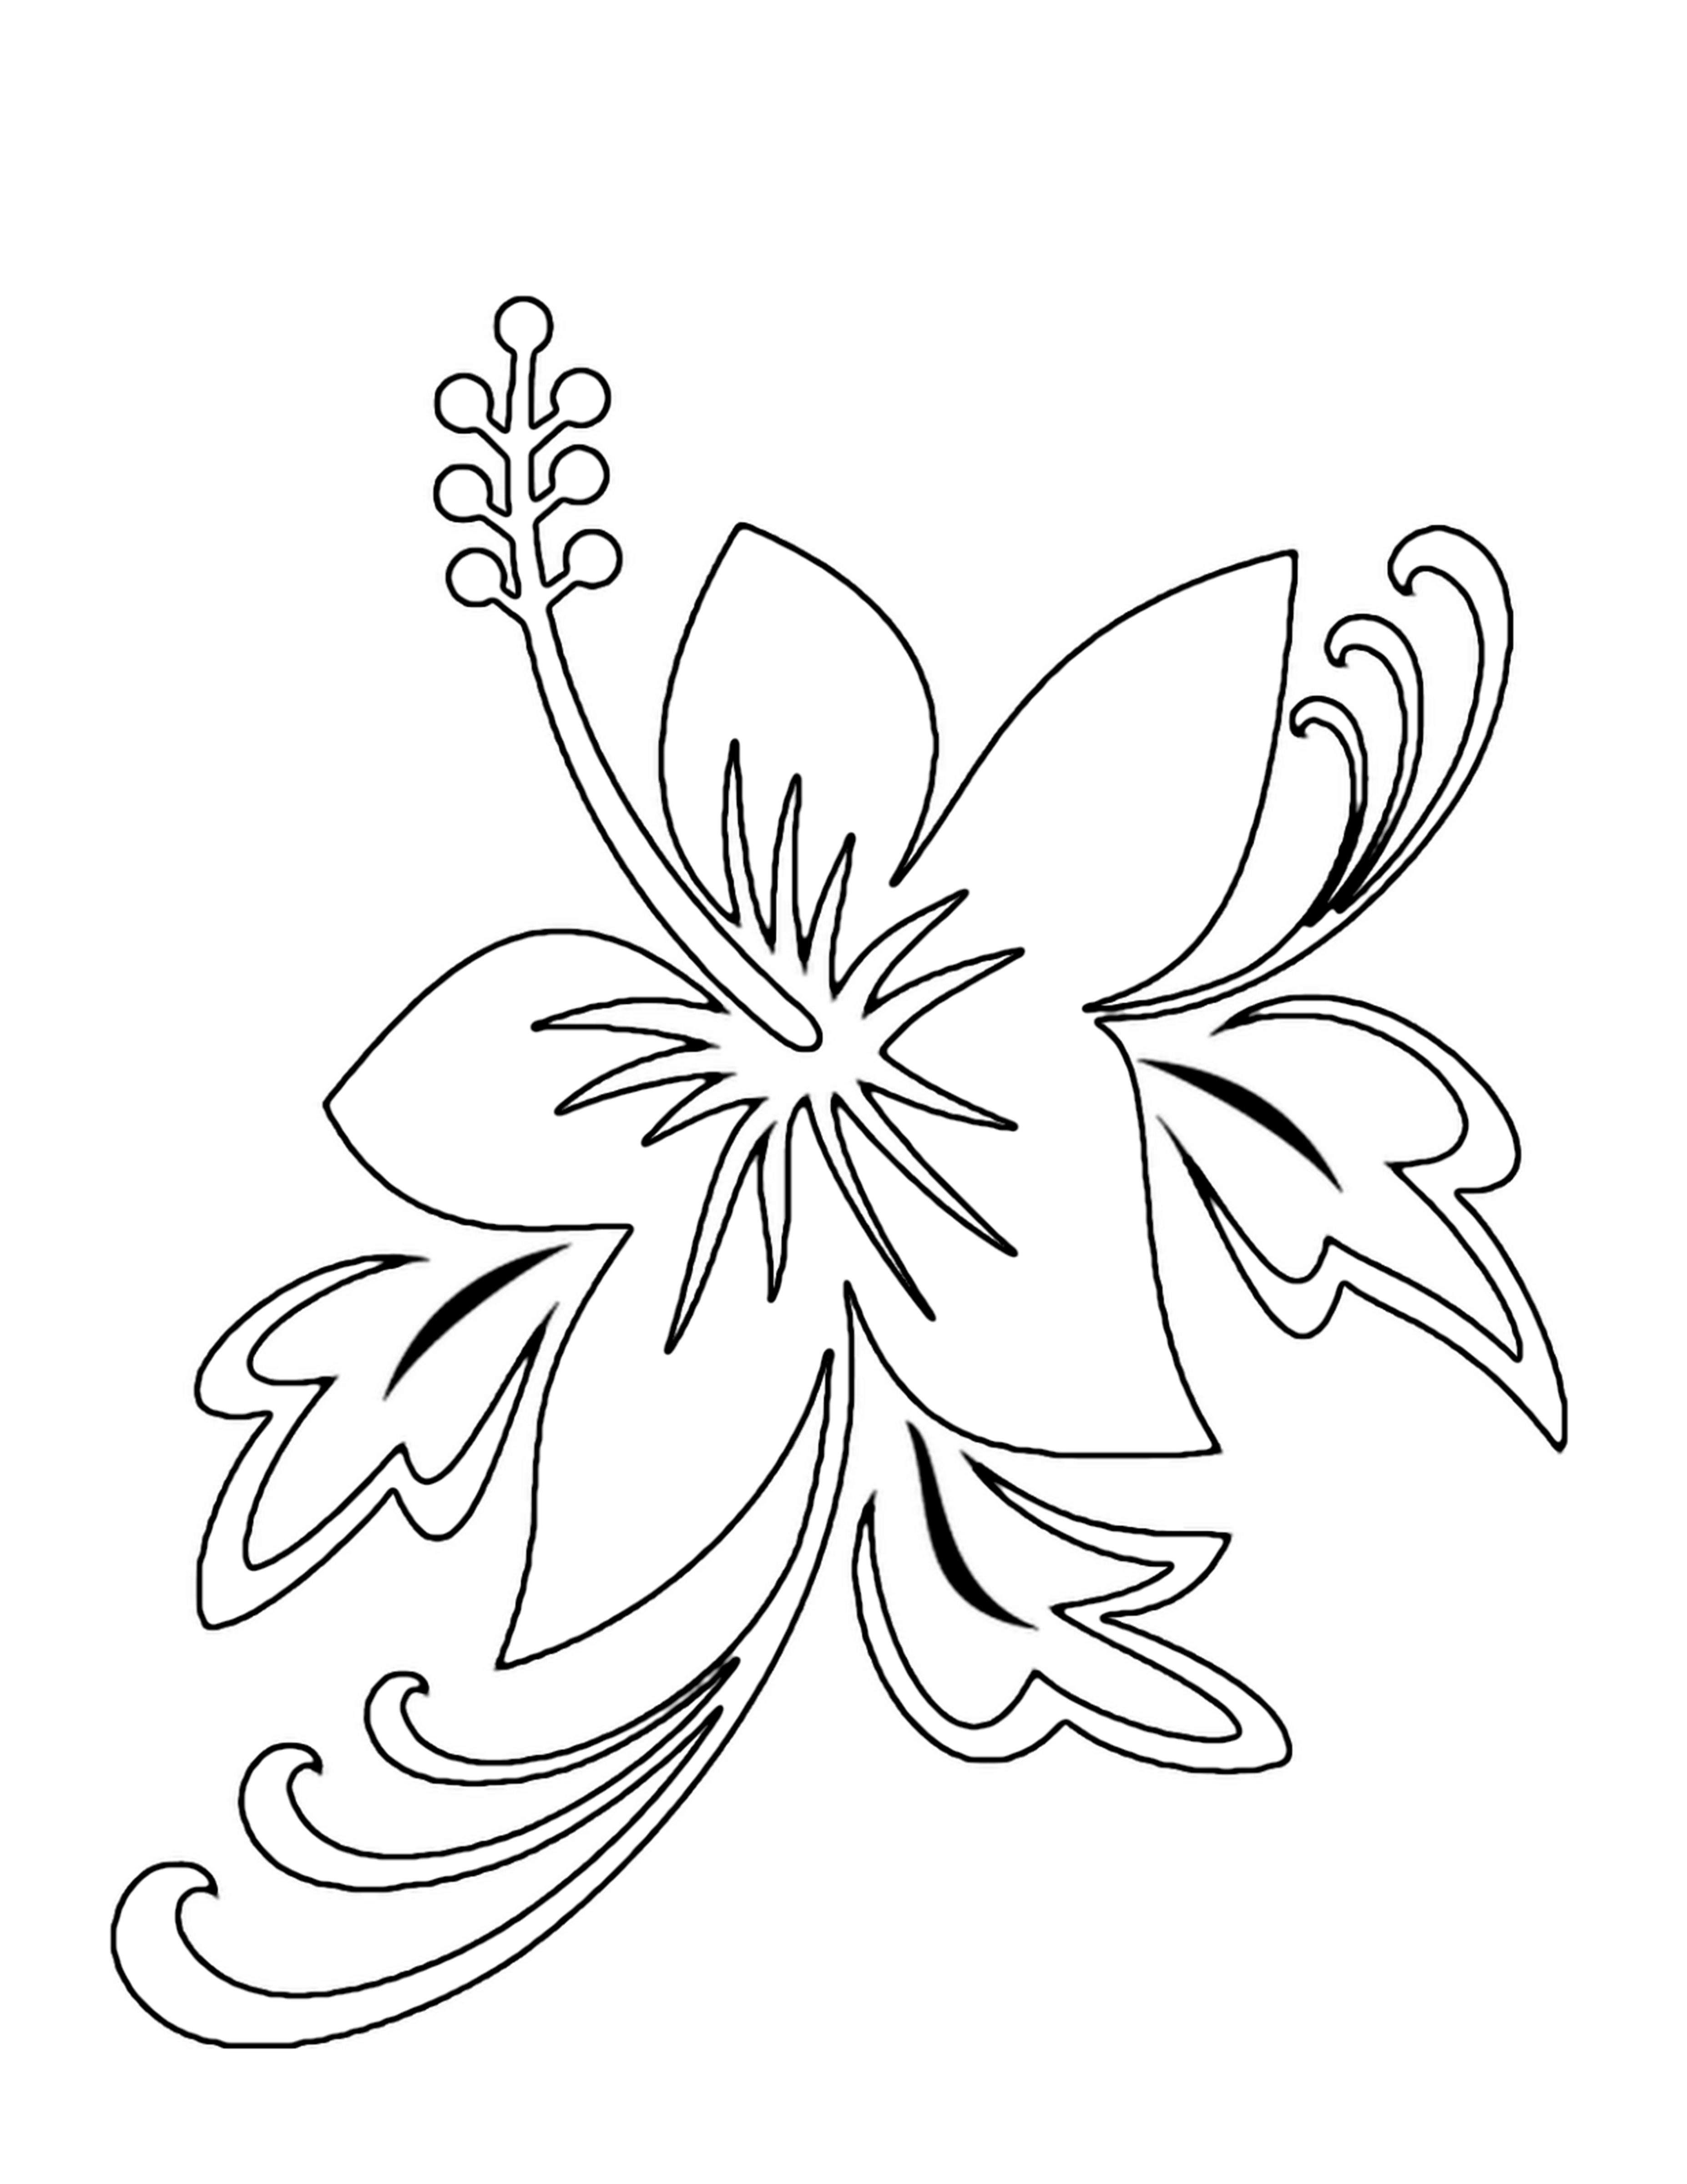 Download Free Printable Flower Coloring Pages For Kids Best Coloring Pages For Kids